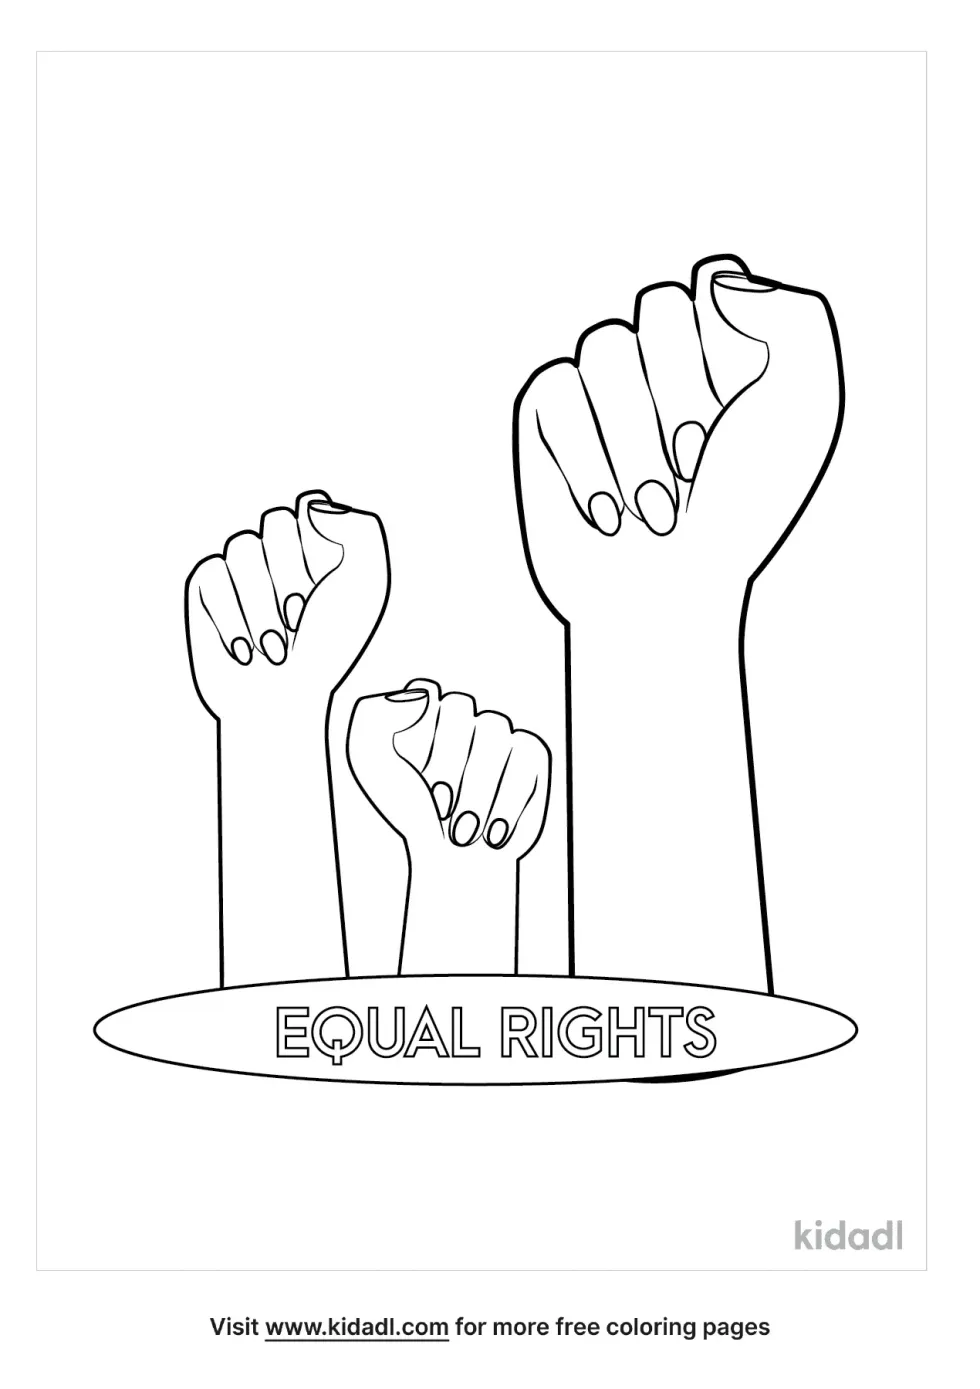 Equal Rights Sign Coloring Page